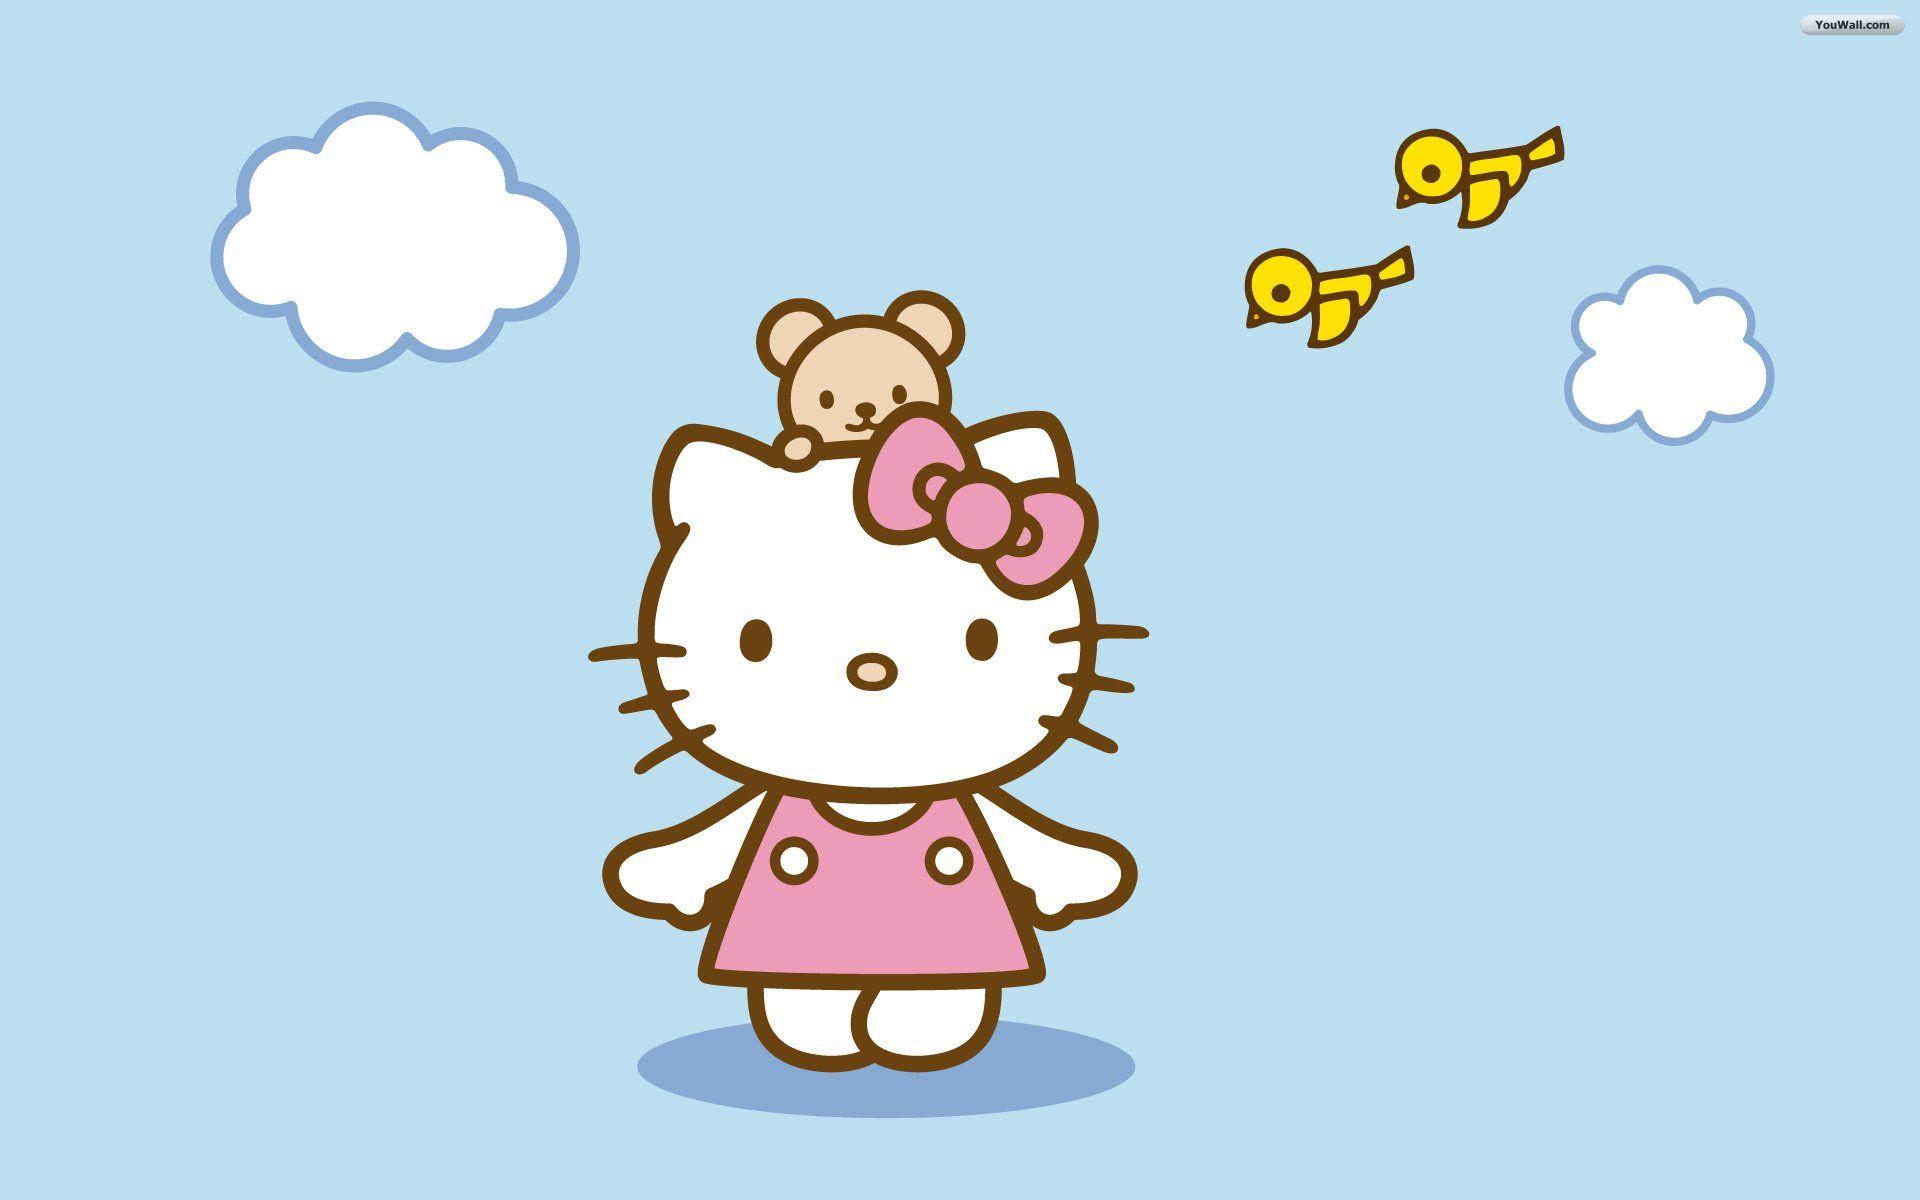 Mac Hello Kitty Wallpapers Top Free Mac Hello Kitty Backgrounds Wallpaperaccess Find and download hello kitty desktop background on hipwallpaper. mac hello kitty wallpapers top free